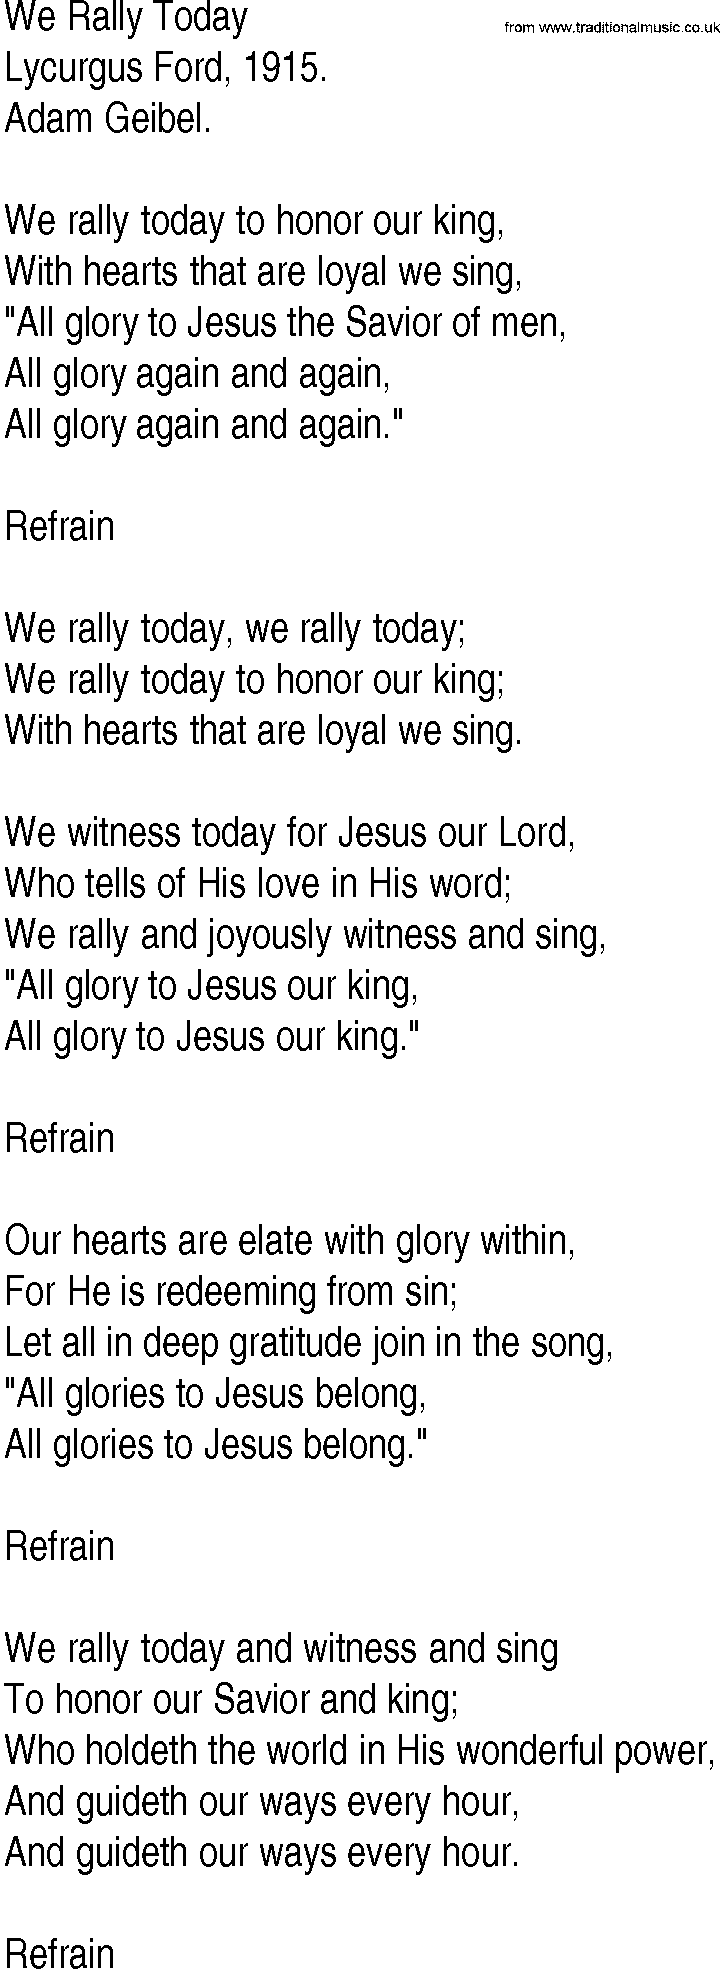 Hymn and Gospel Song: We Rally Today by Lycurgus Ford lyrics